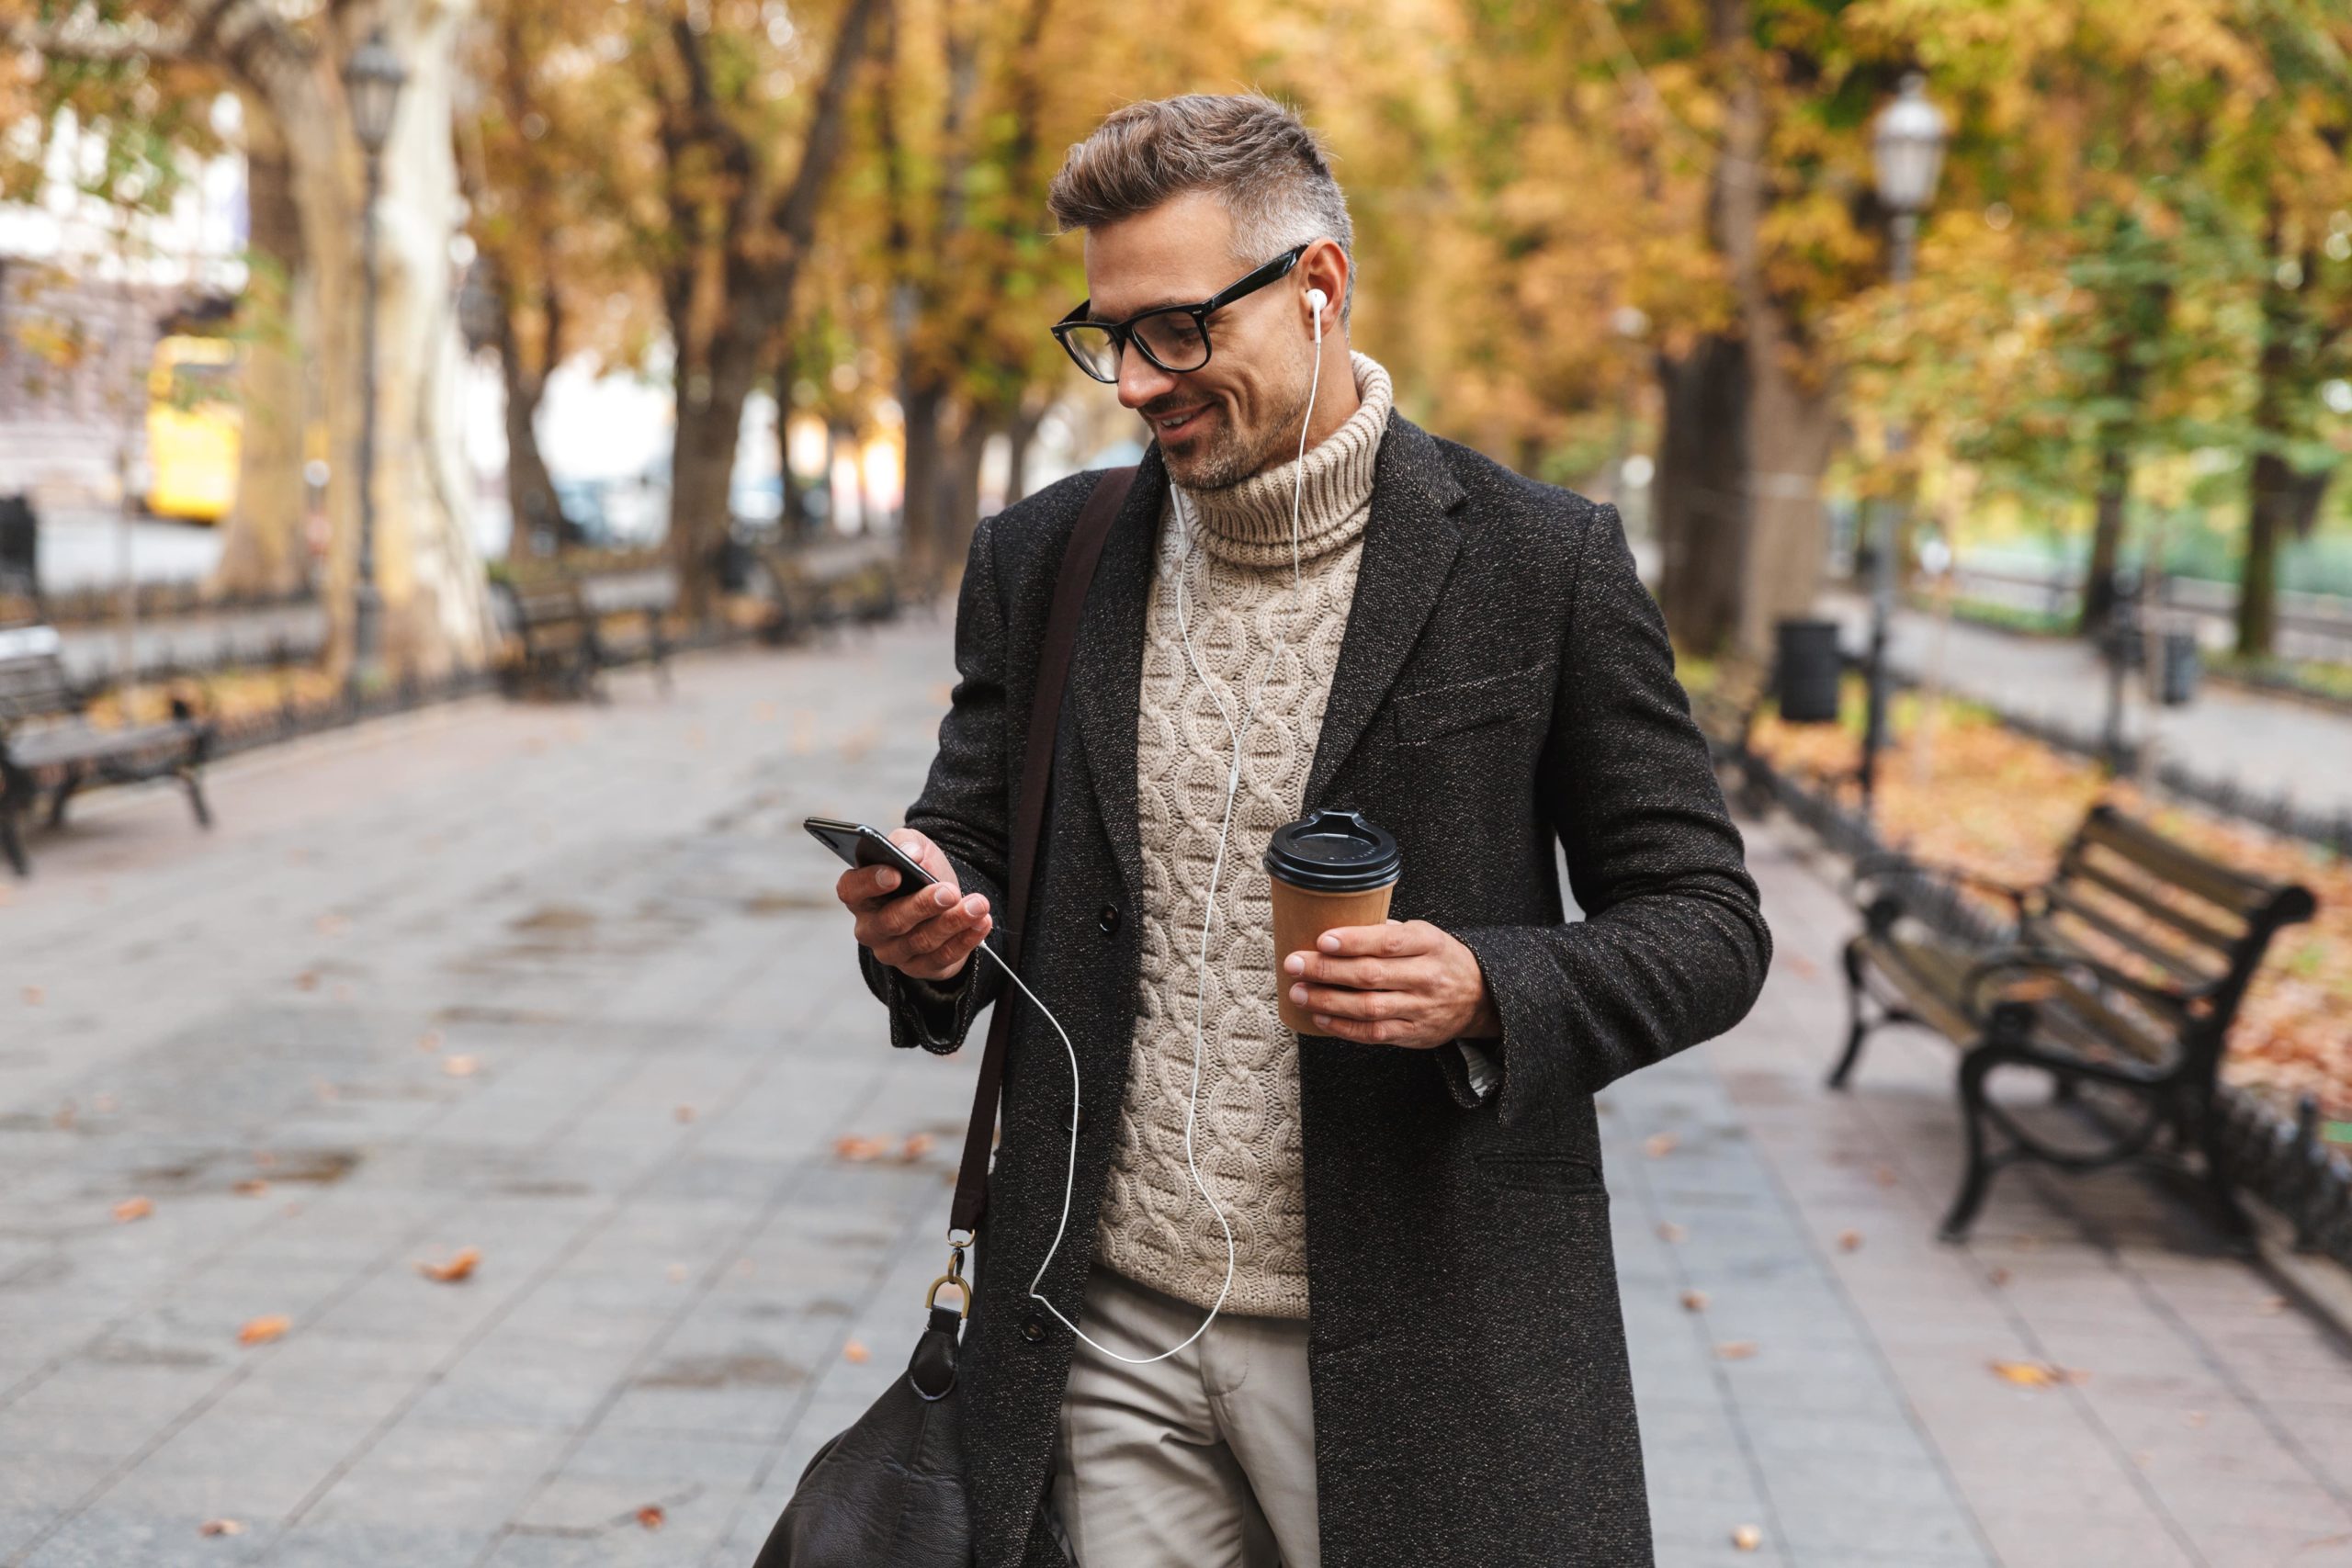 AVirtual blog practical guide working with virtual assistant smiling man with grey hair walking down the street looking at his phone wearing earphones